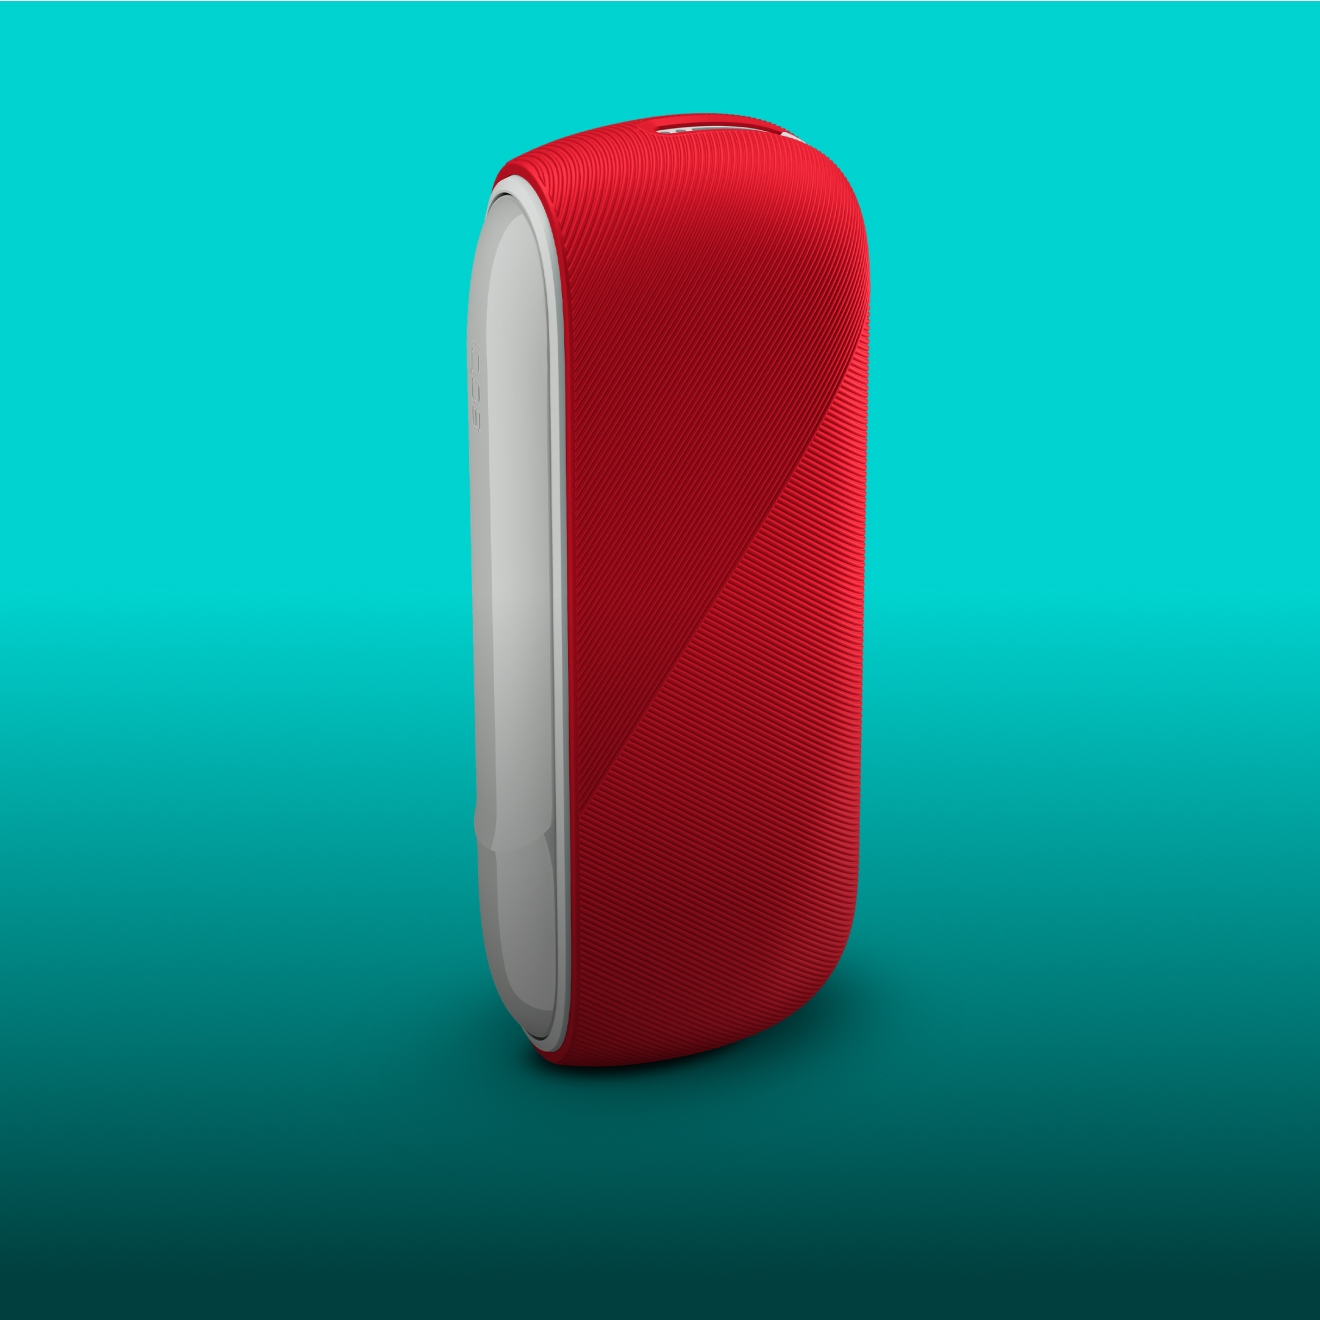 IQOS Originals Duo accessories: silicon sleeve in red.